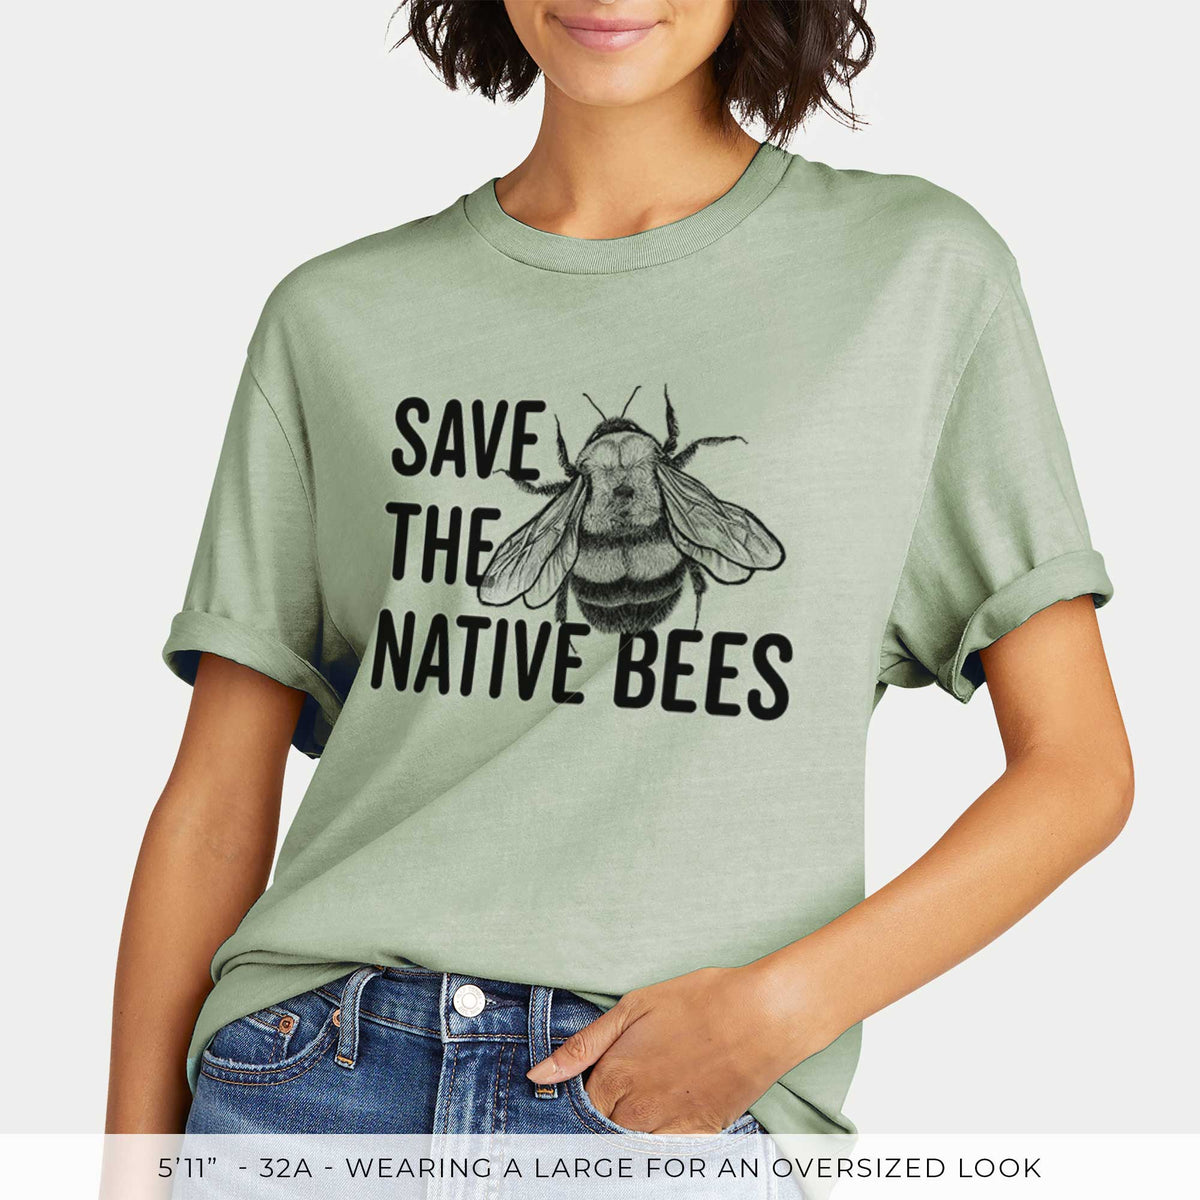 Save the Native Bees -  Mineral Wash 100% Organic Cotton Short Sleeve